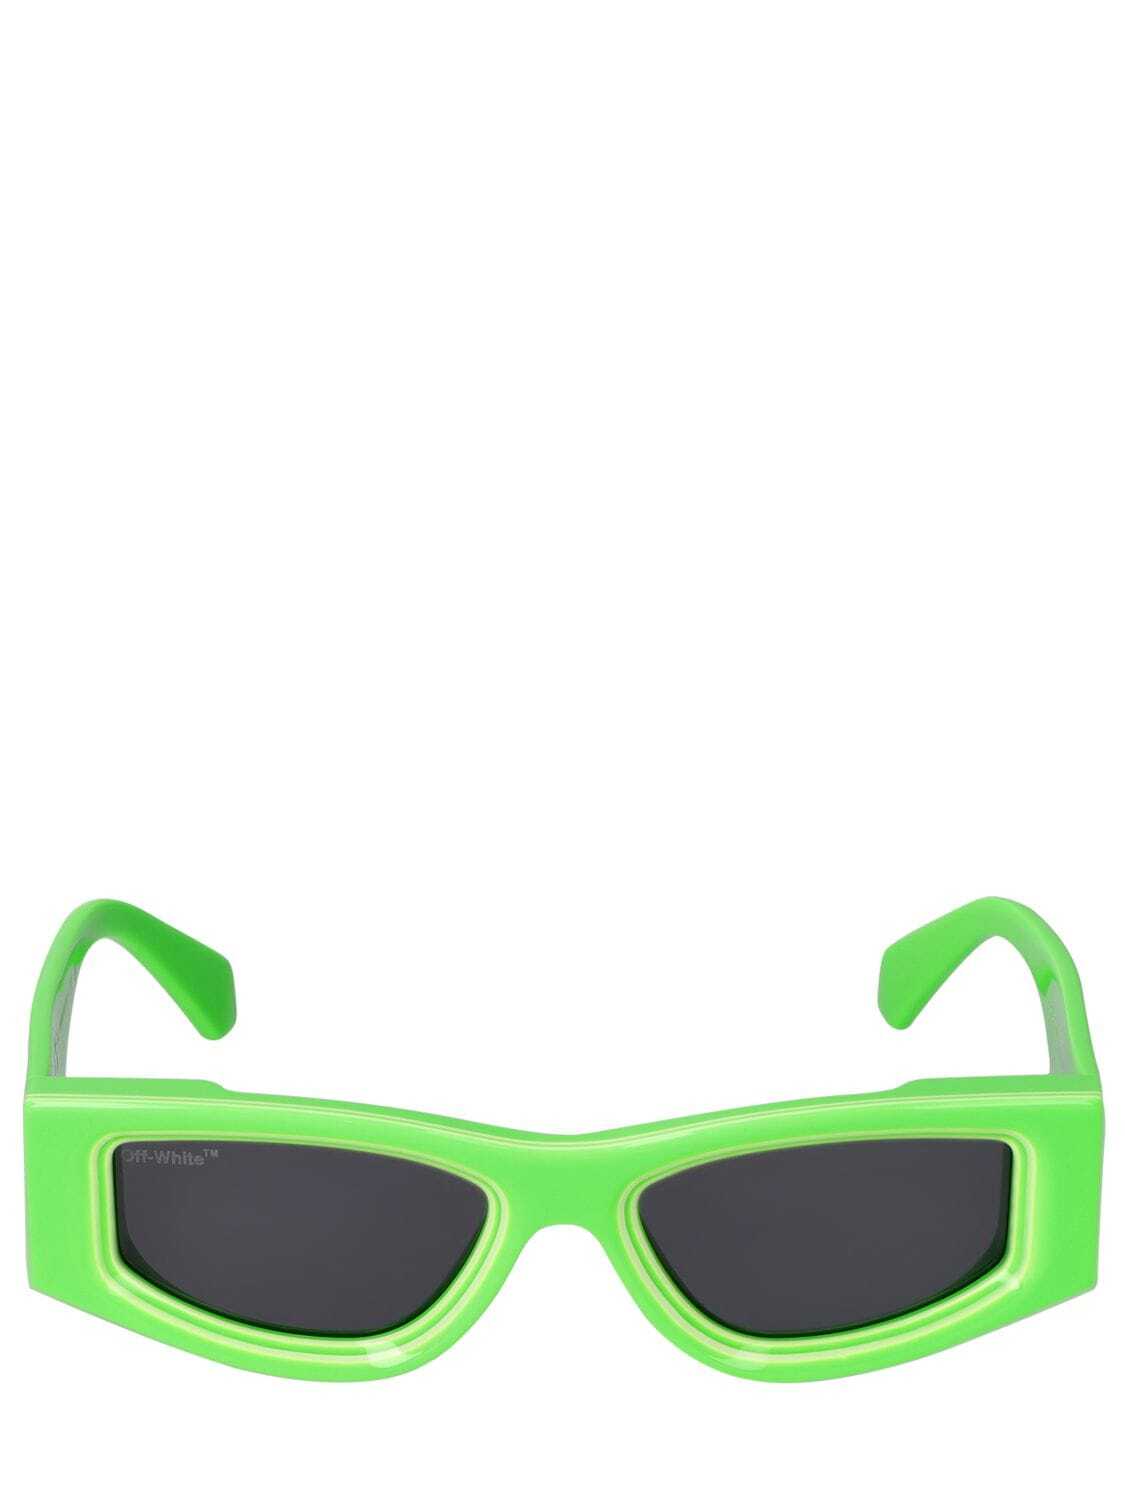 OFF-WHITE Andy Squared Acetate Sunglasses in green